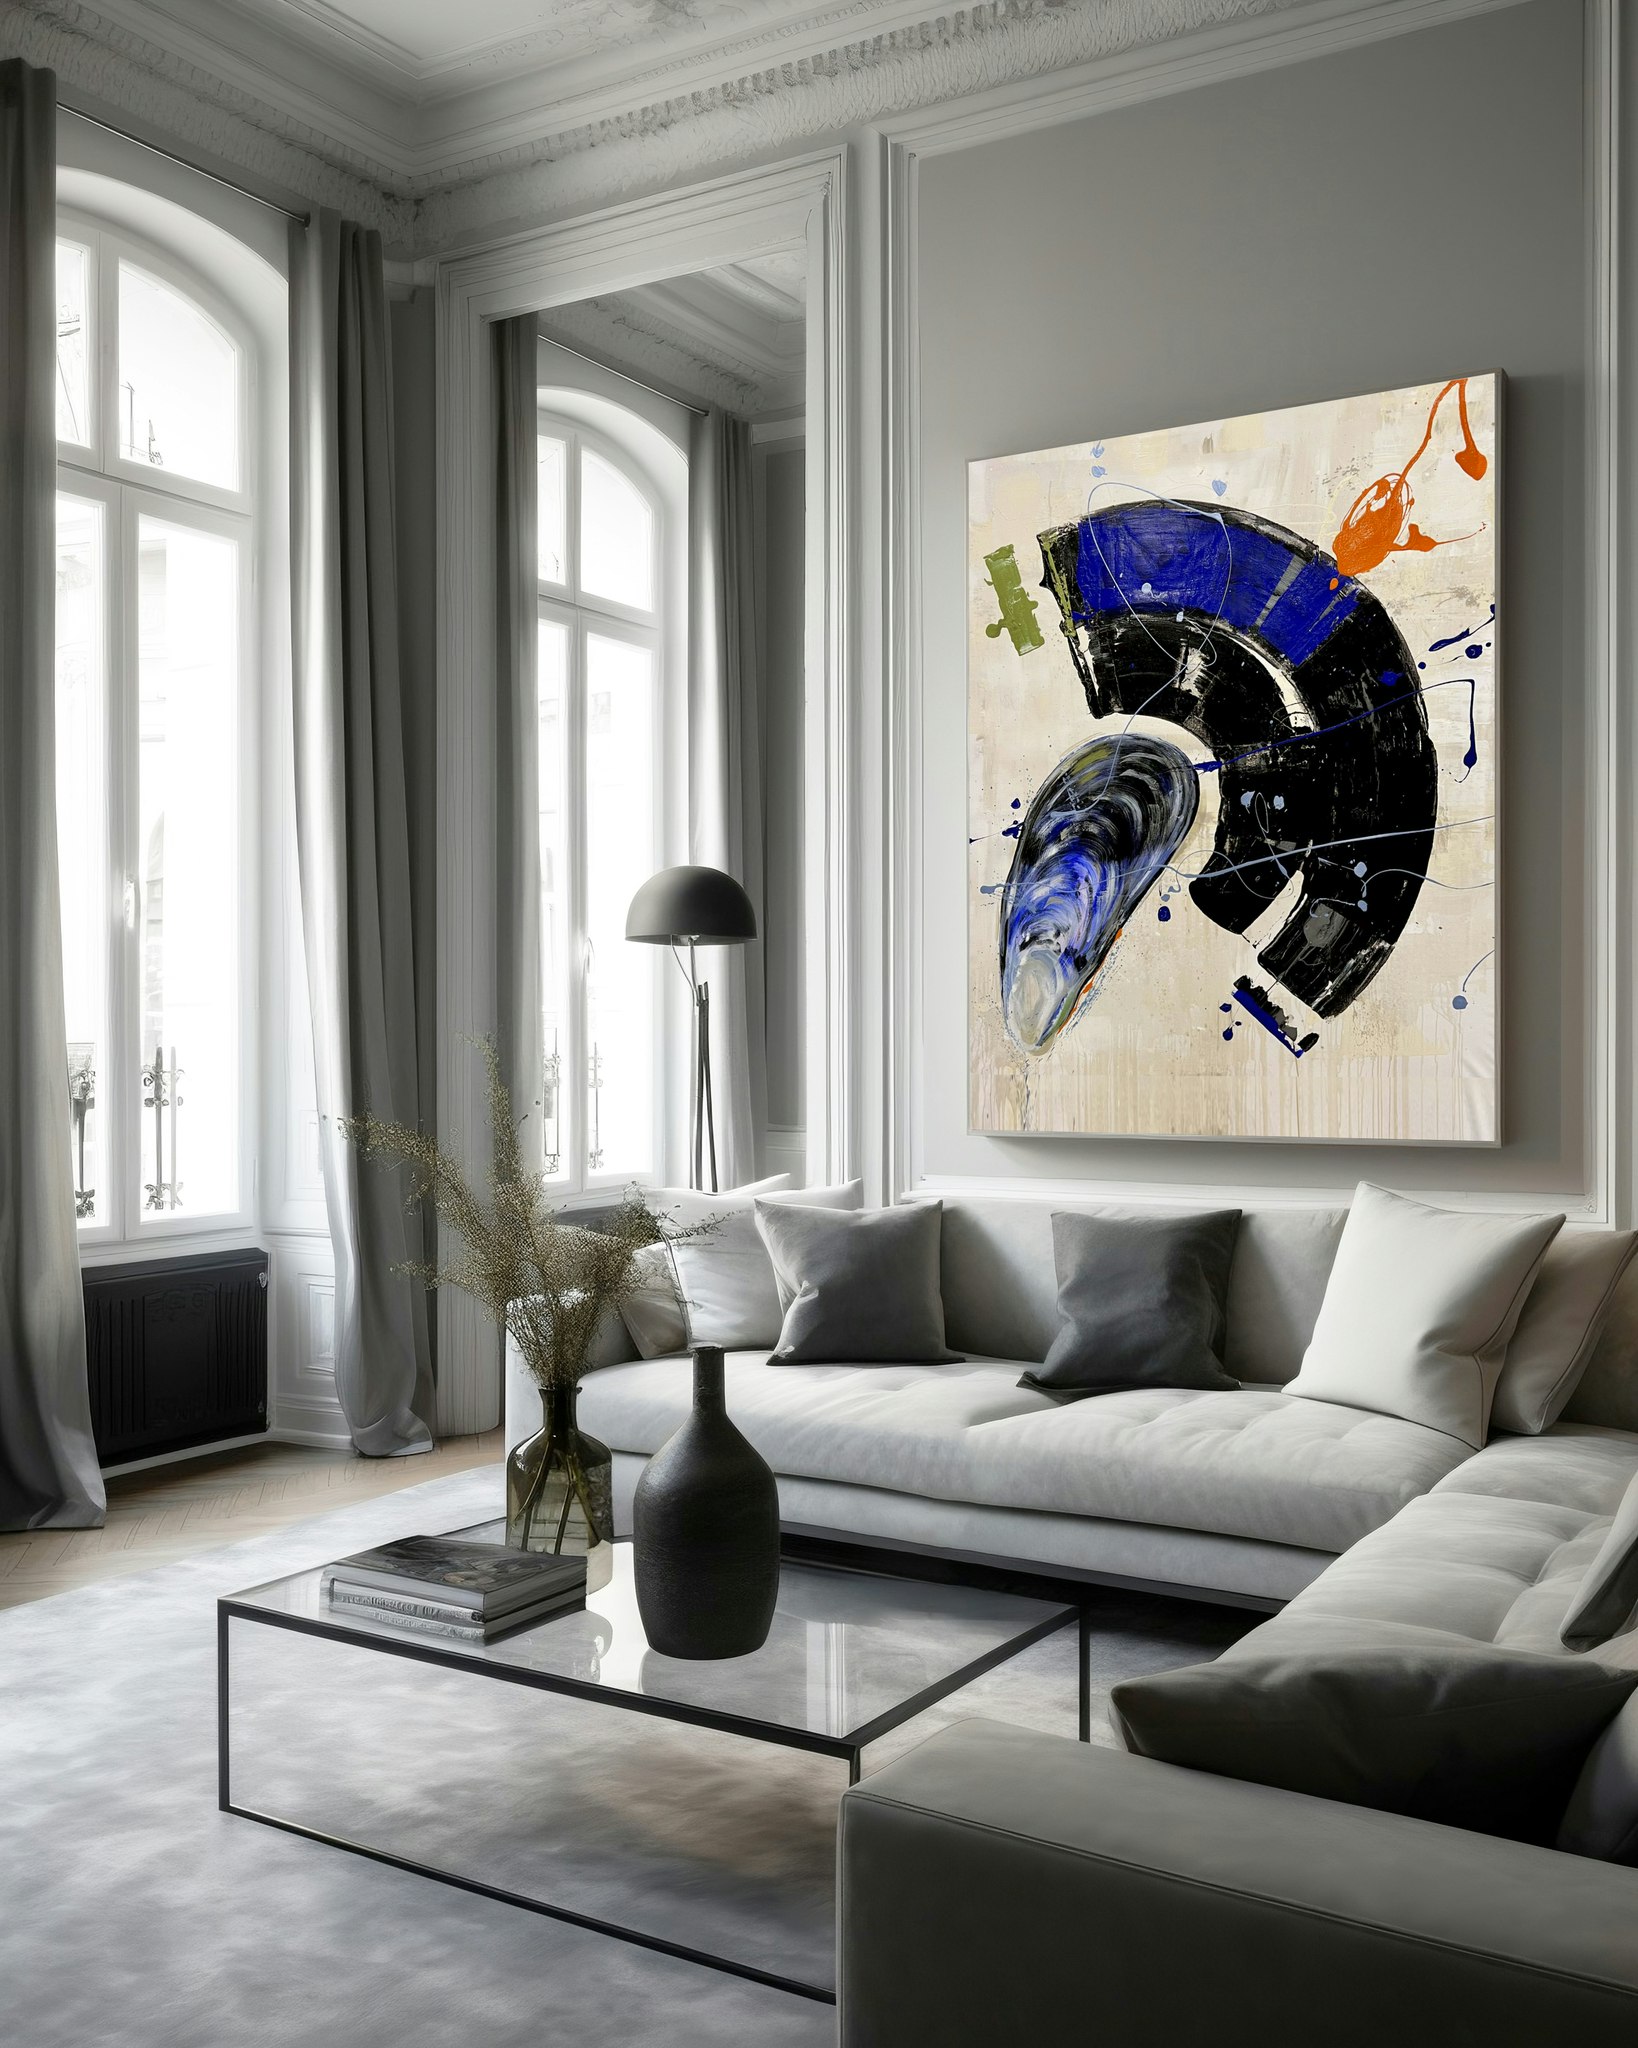 MOULE LOVE FROM THE SEA - ORIGINAL PAINTING ON CANVAS